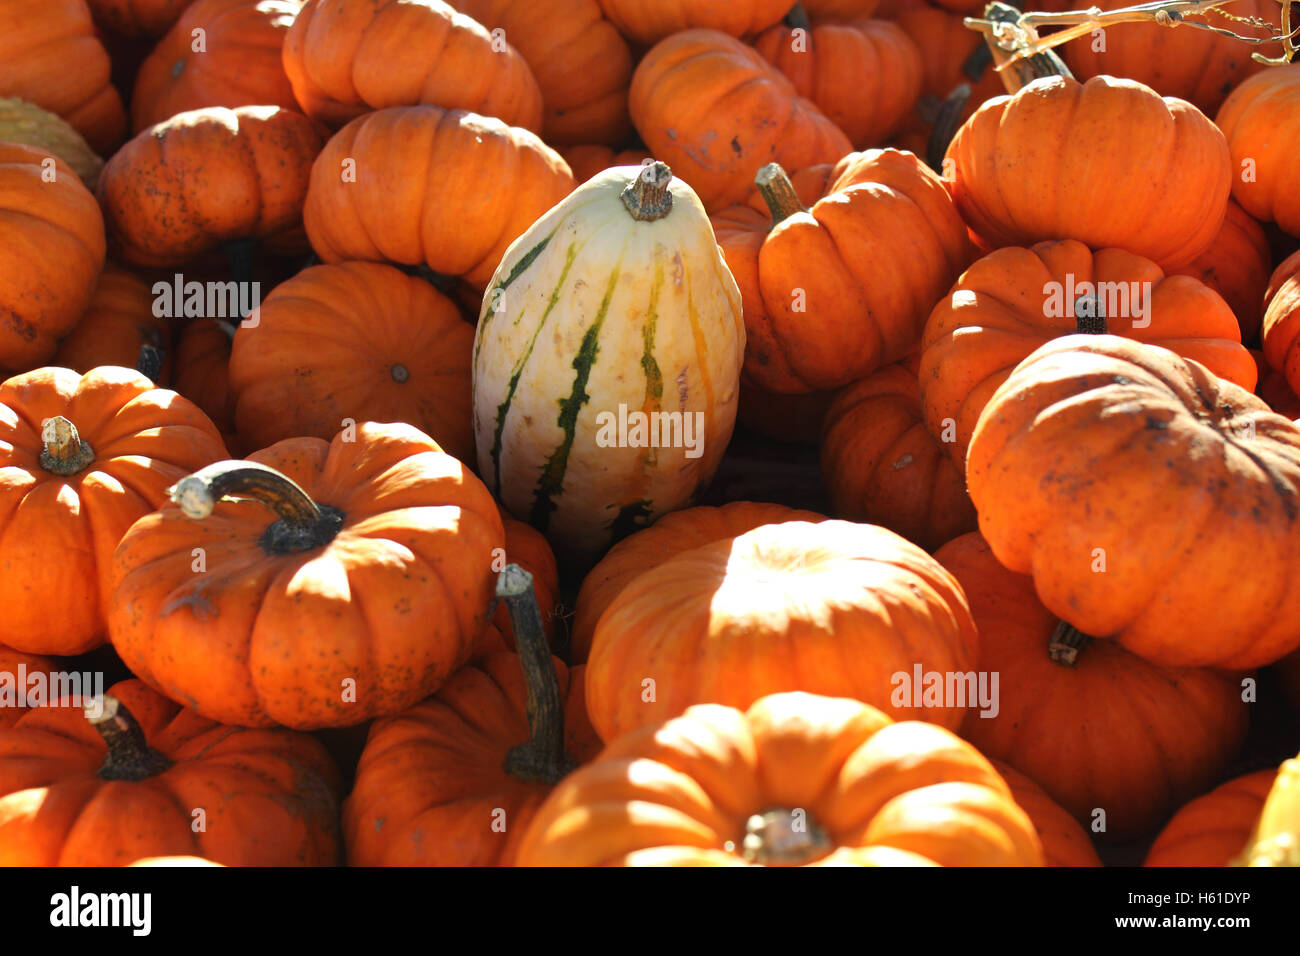 small white ghord or squash among small orange halloween pumpkins Stock Photo